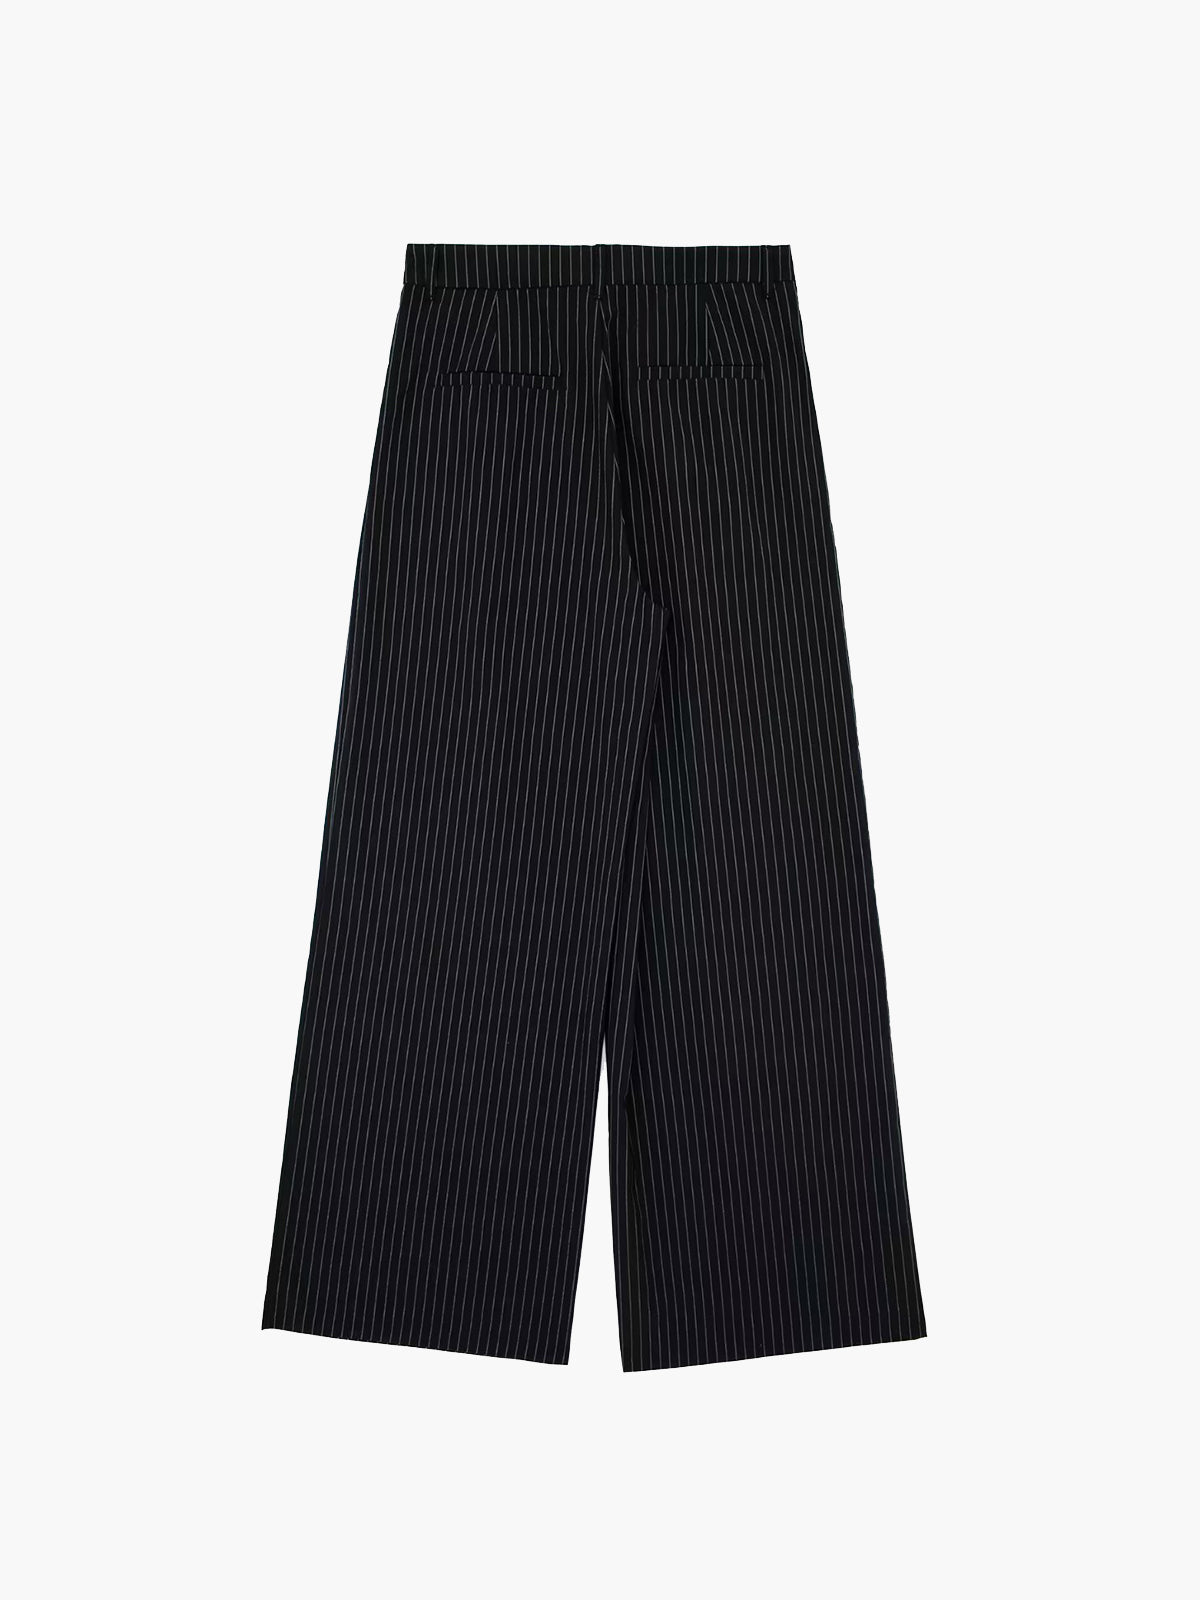 Challenge Accepted Pinstripe Wide Leg Pants